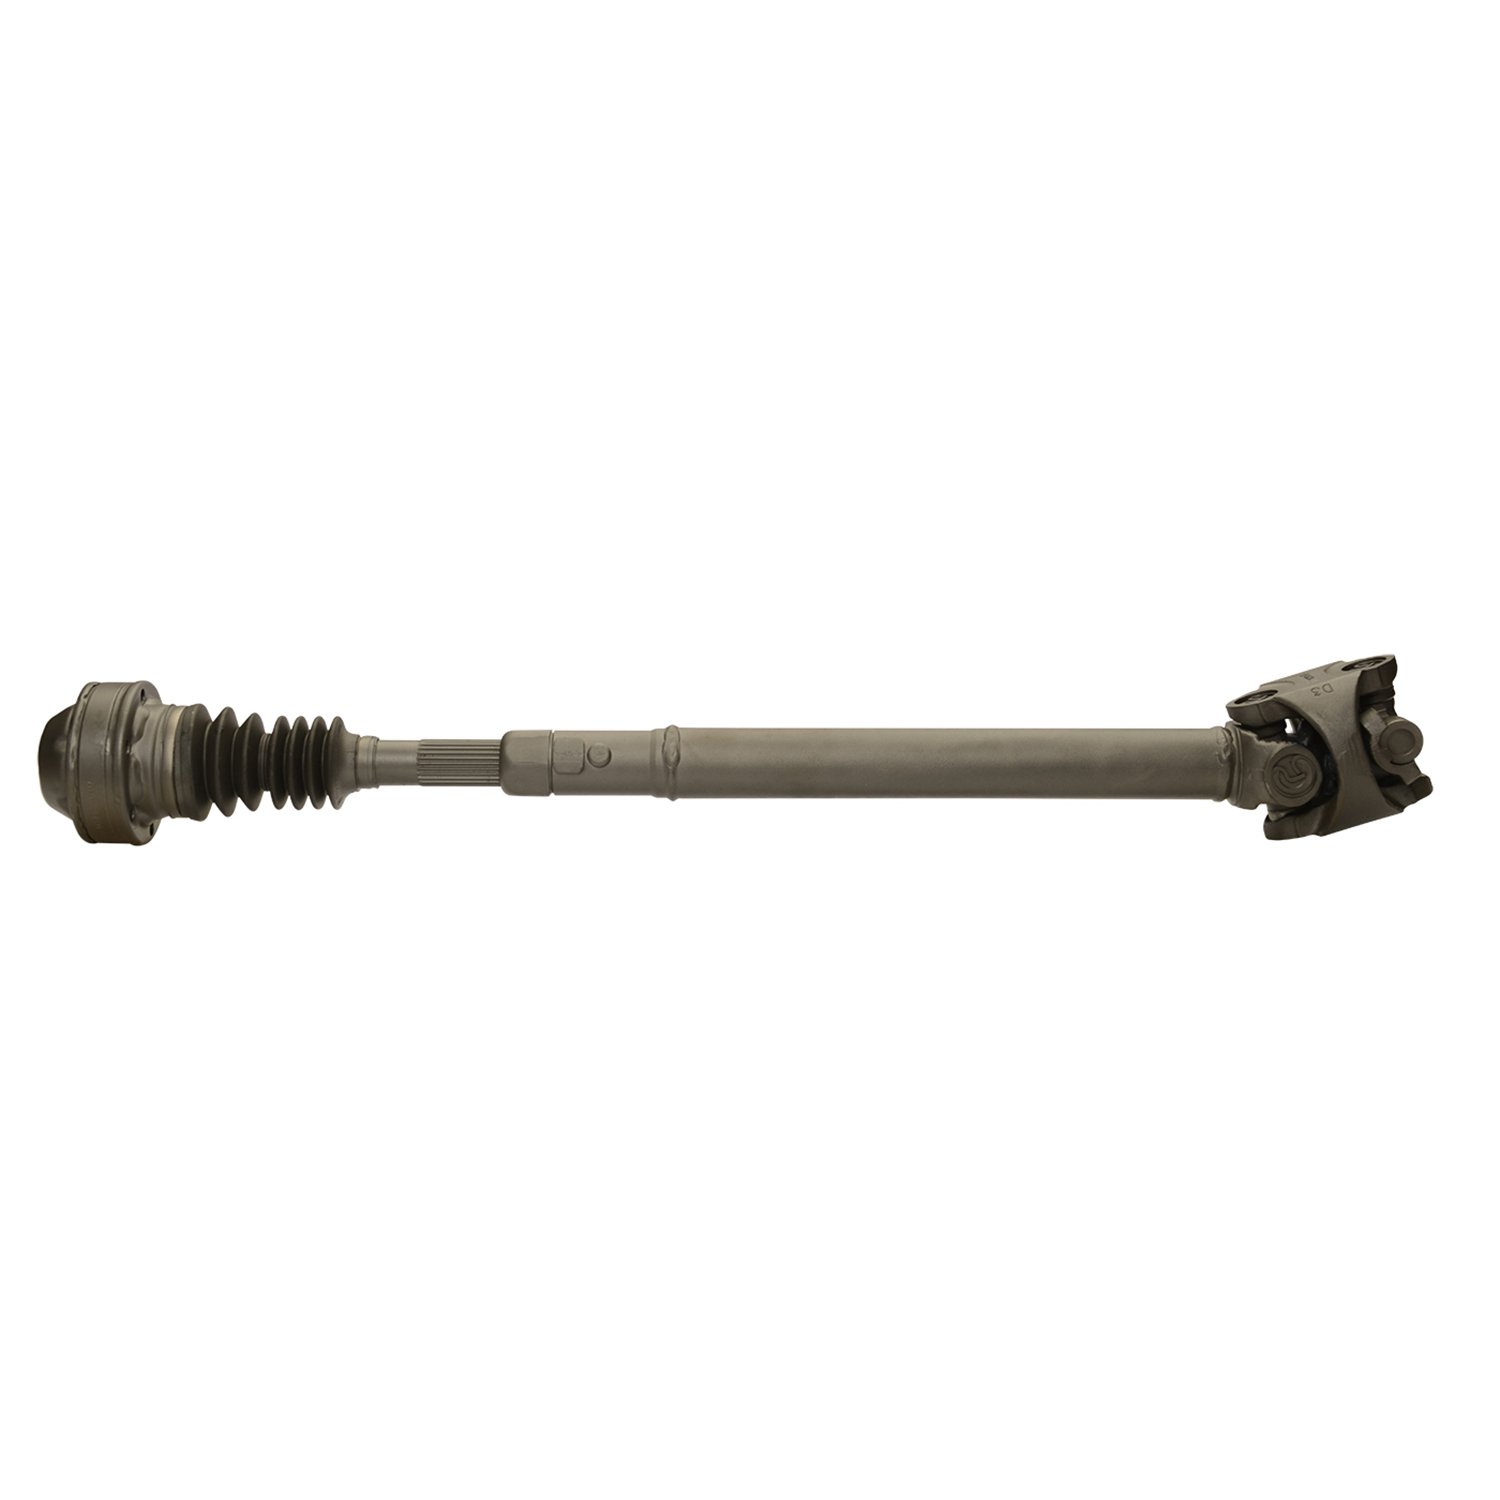 USA Standard ZDS9820 Front Driveshaft, For Cherokee & Wagoneer Conv, 25.1258 in. Center-To-Center